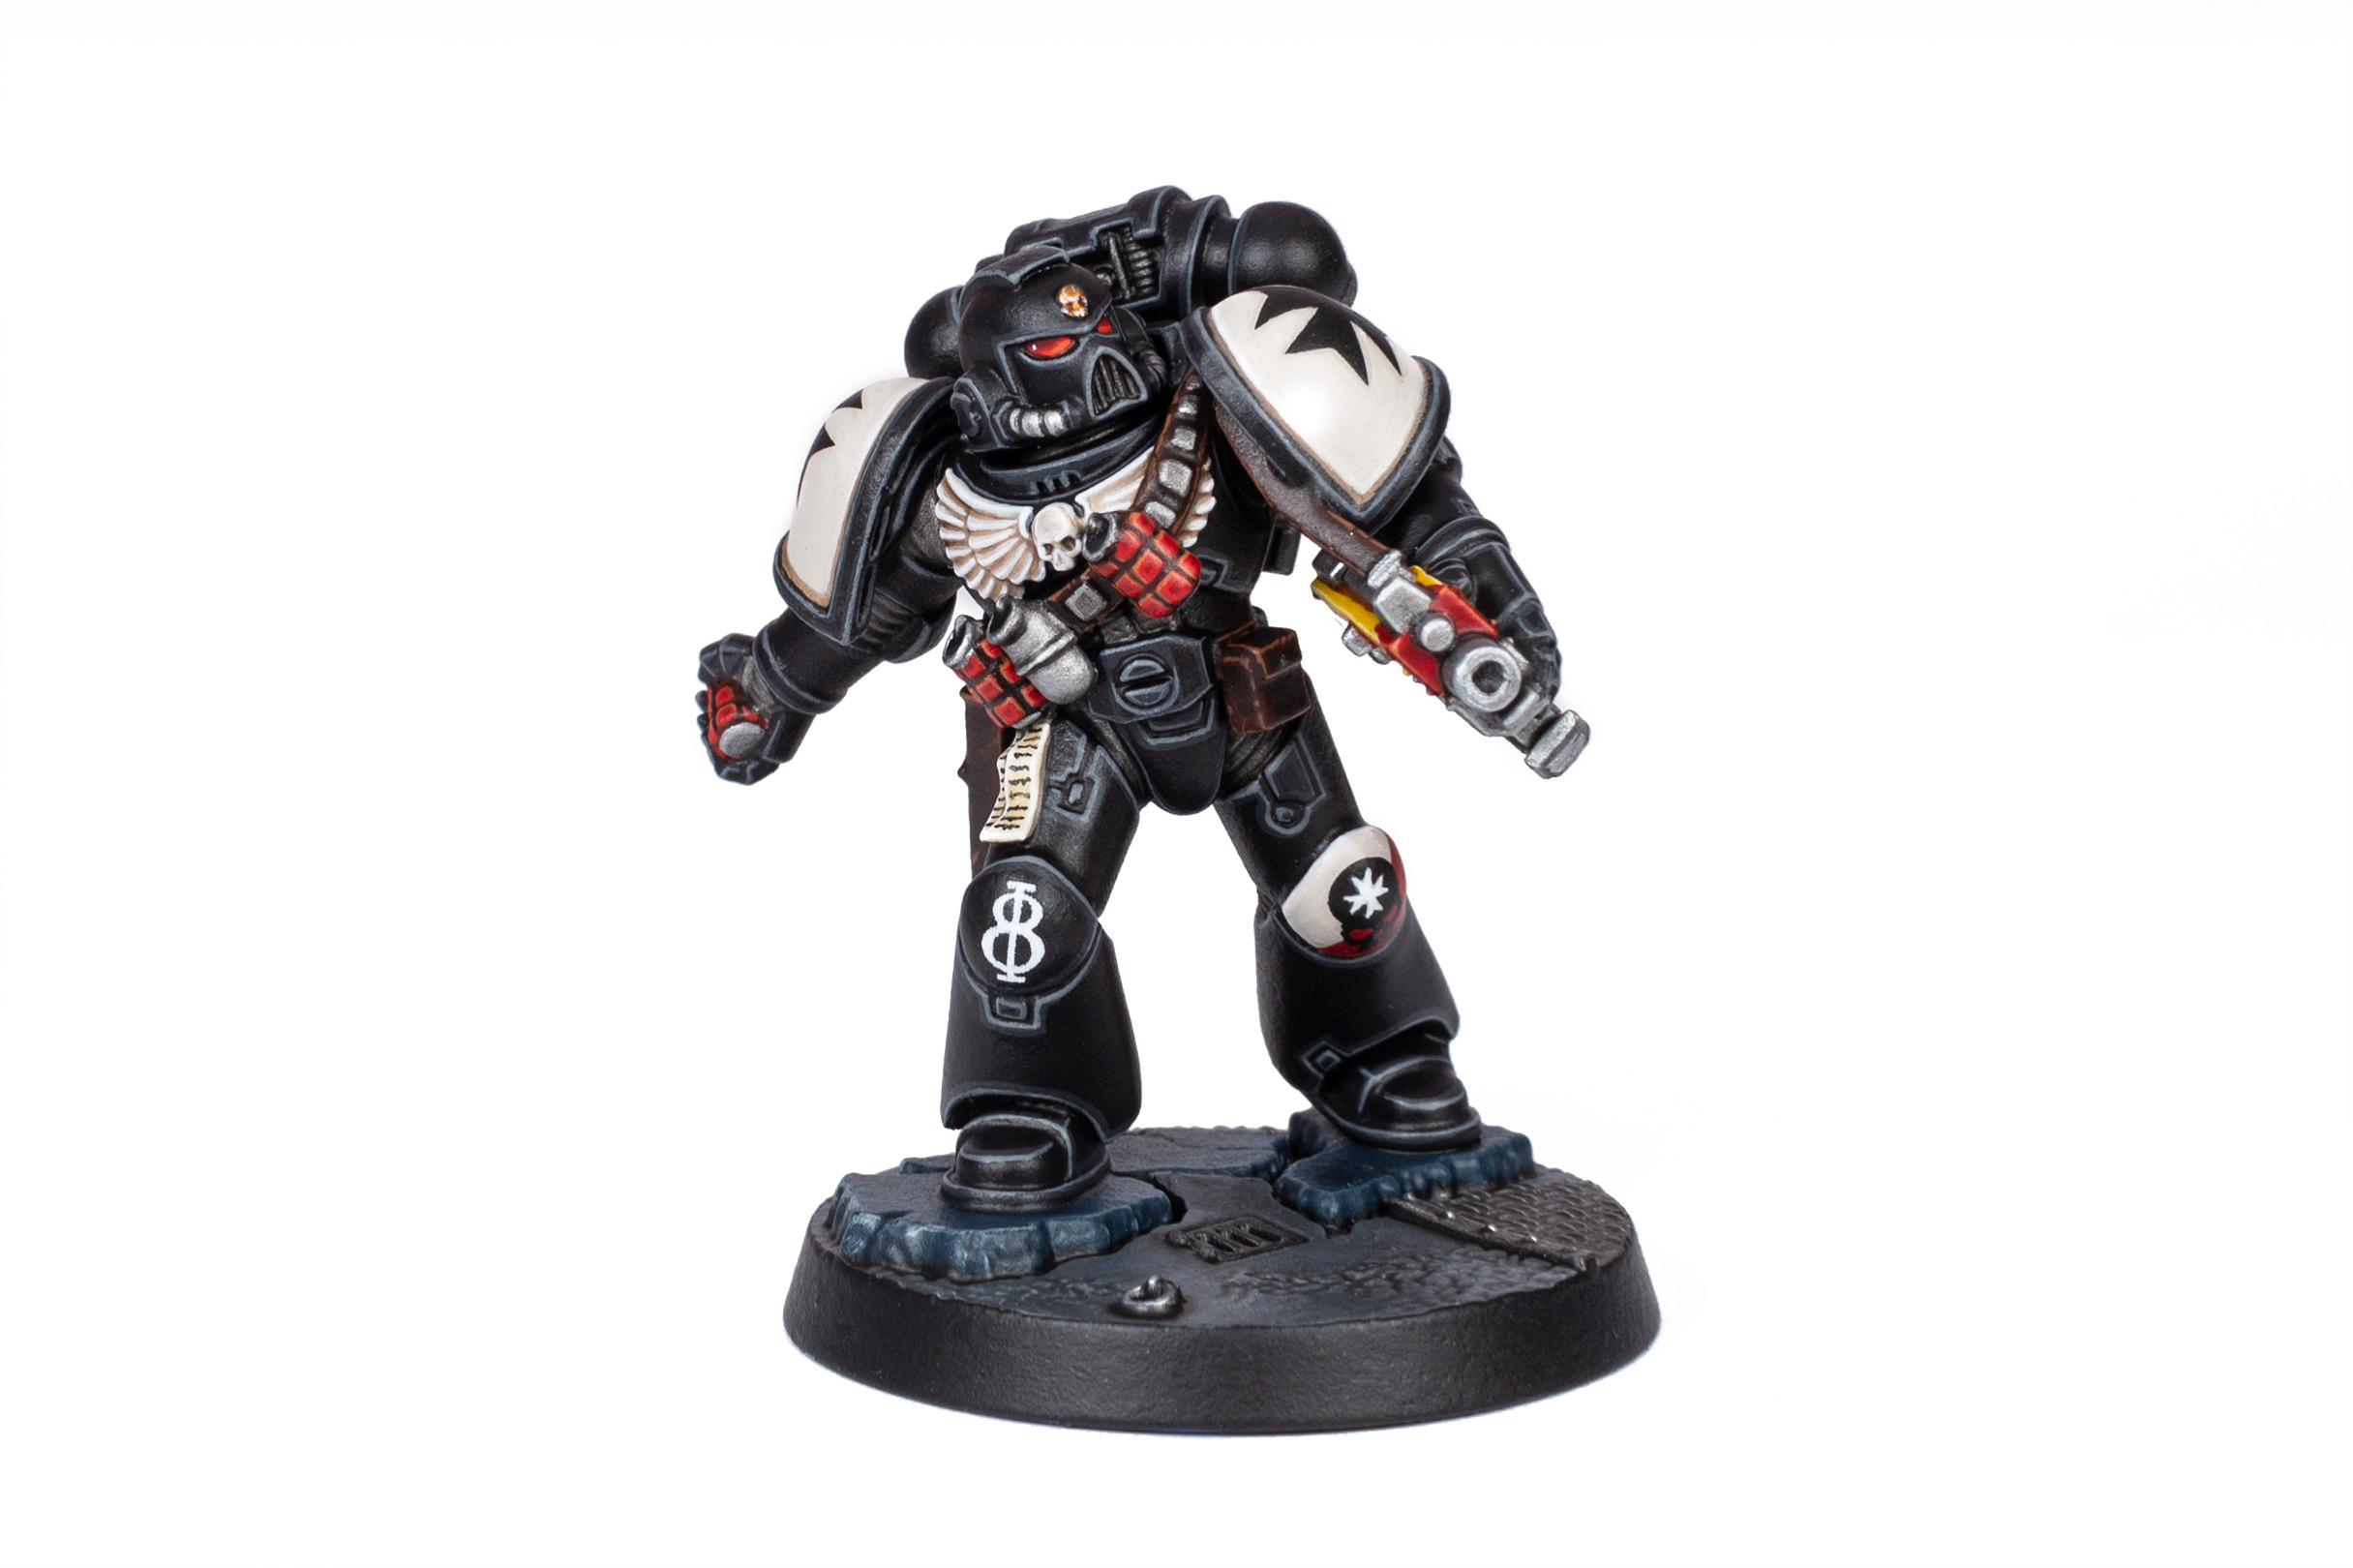 Brother Vanial from the Space Marine Heroes Series 1 painted as a Black Templar